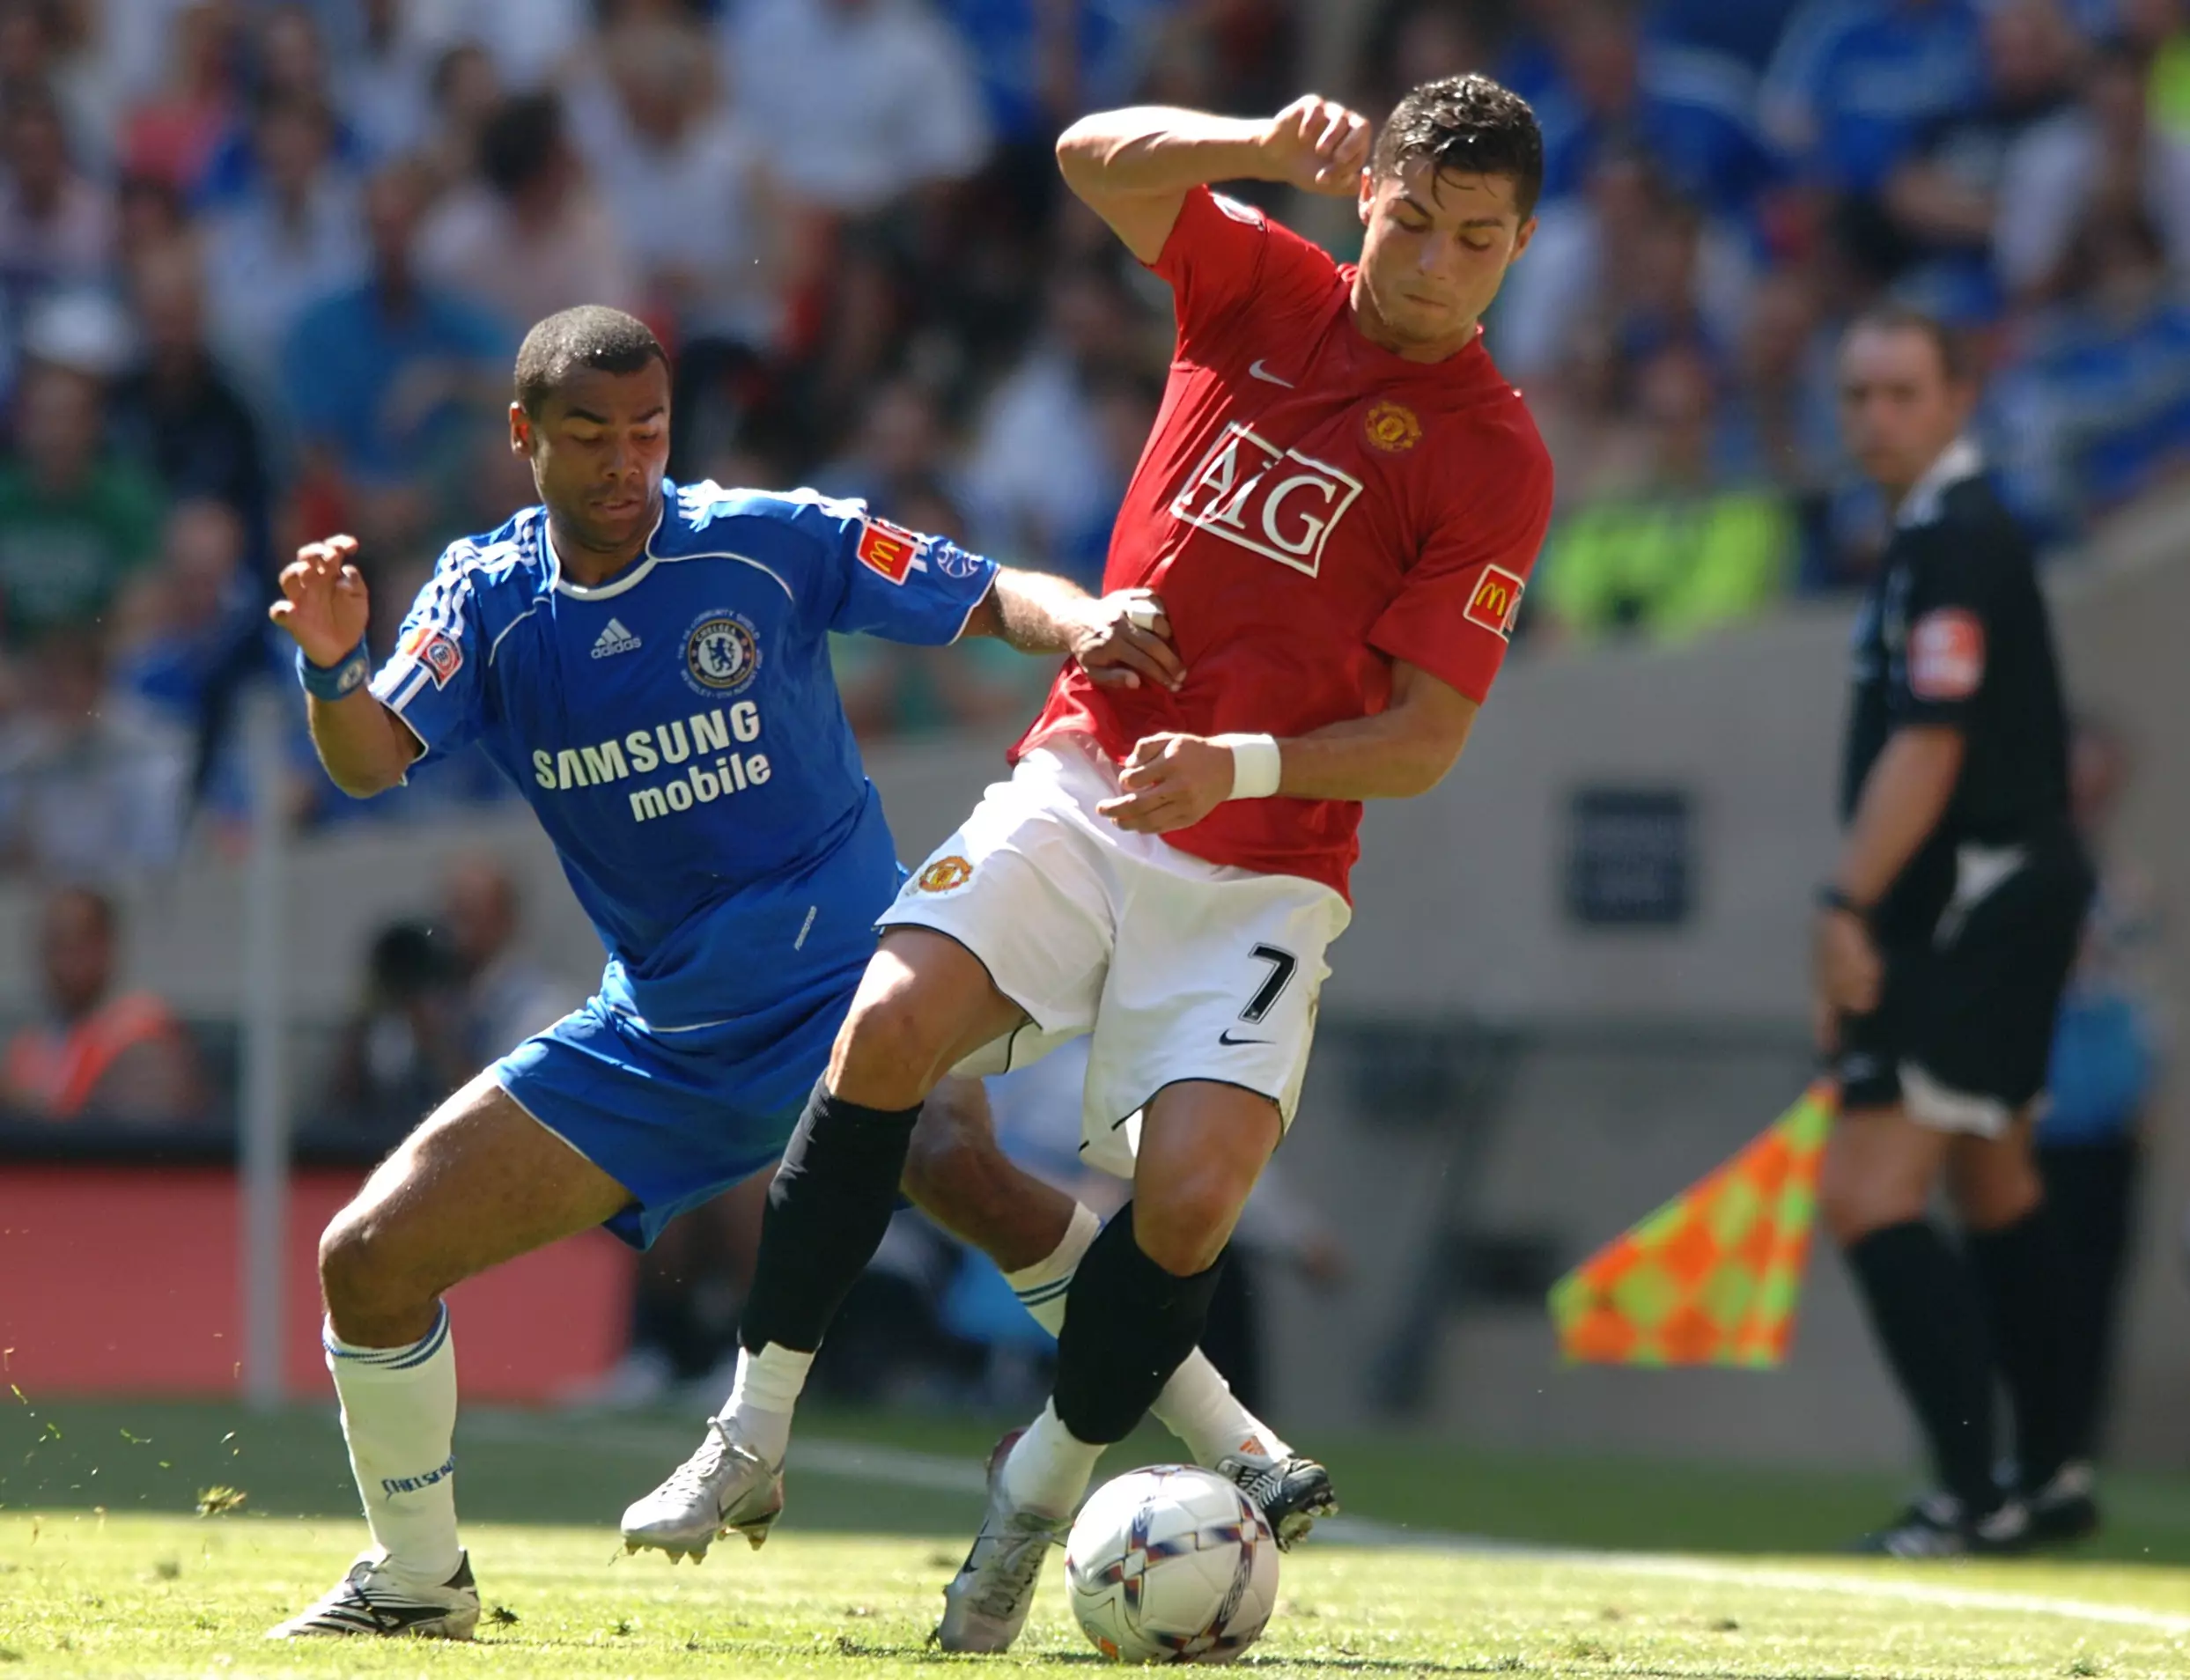 Ronaldo and Cole during a game in 2007. (Image